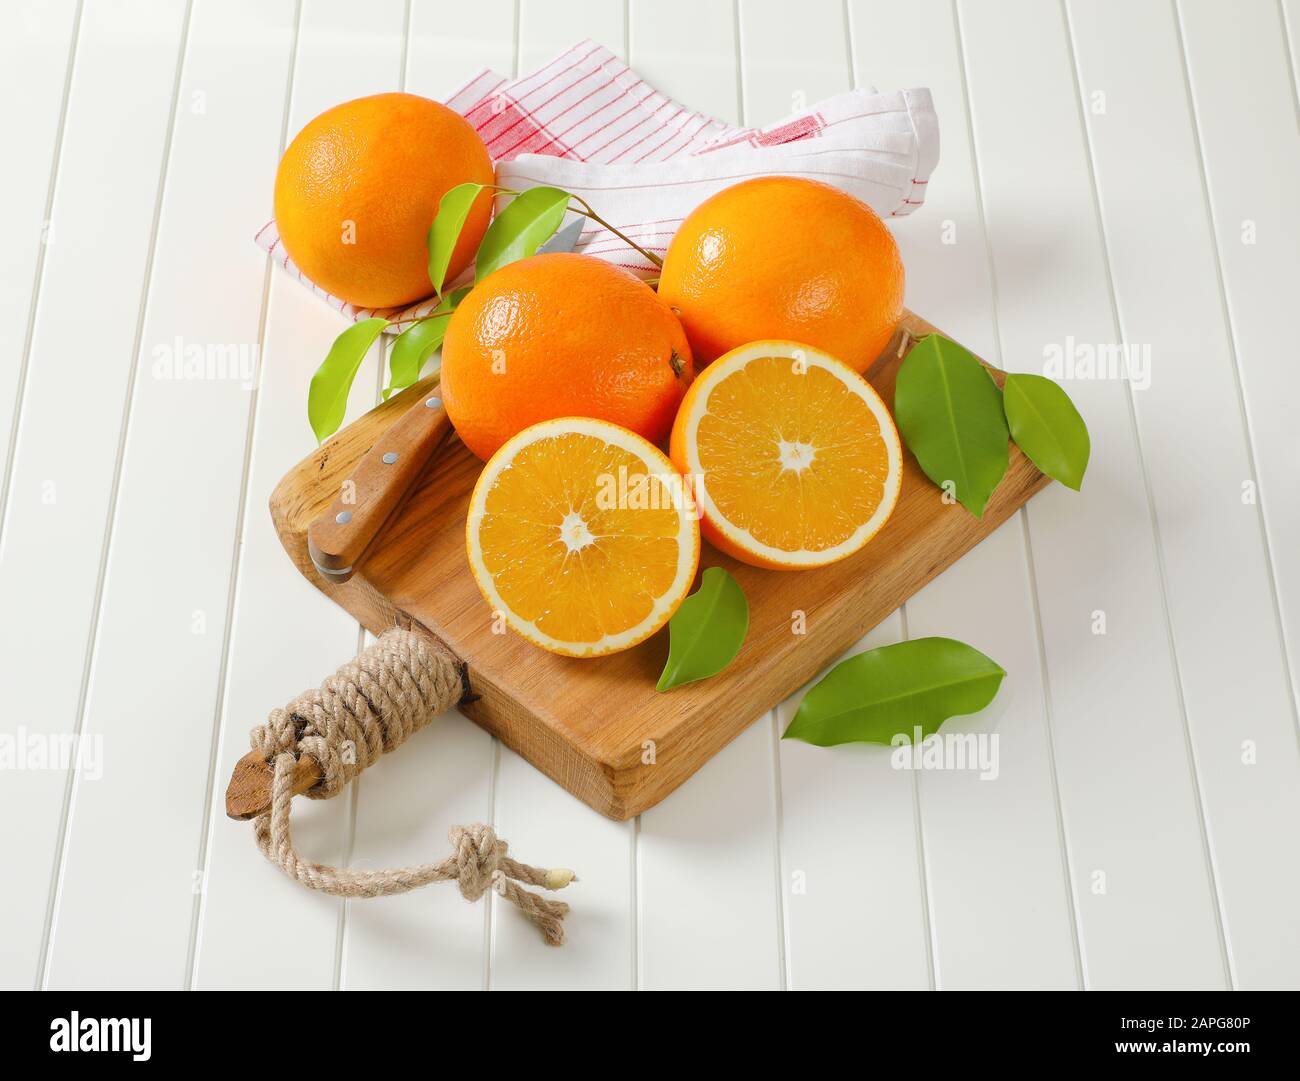 Whole ripe oranges and two halves on cutting board Stock Photo